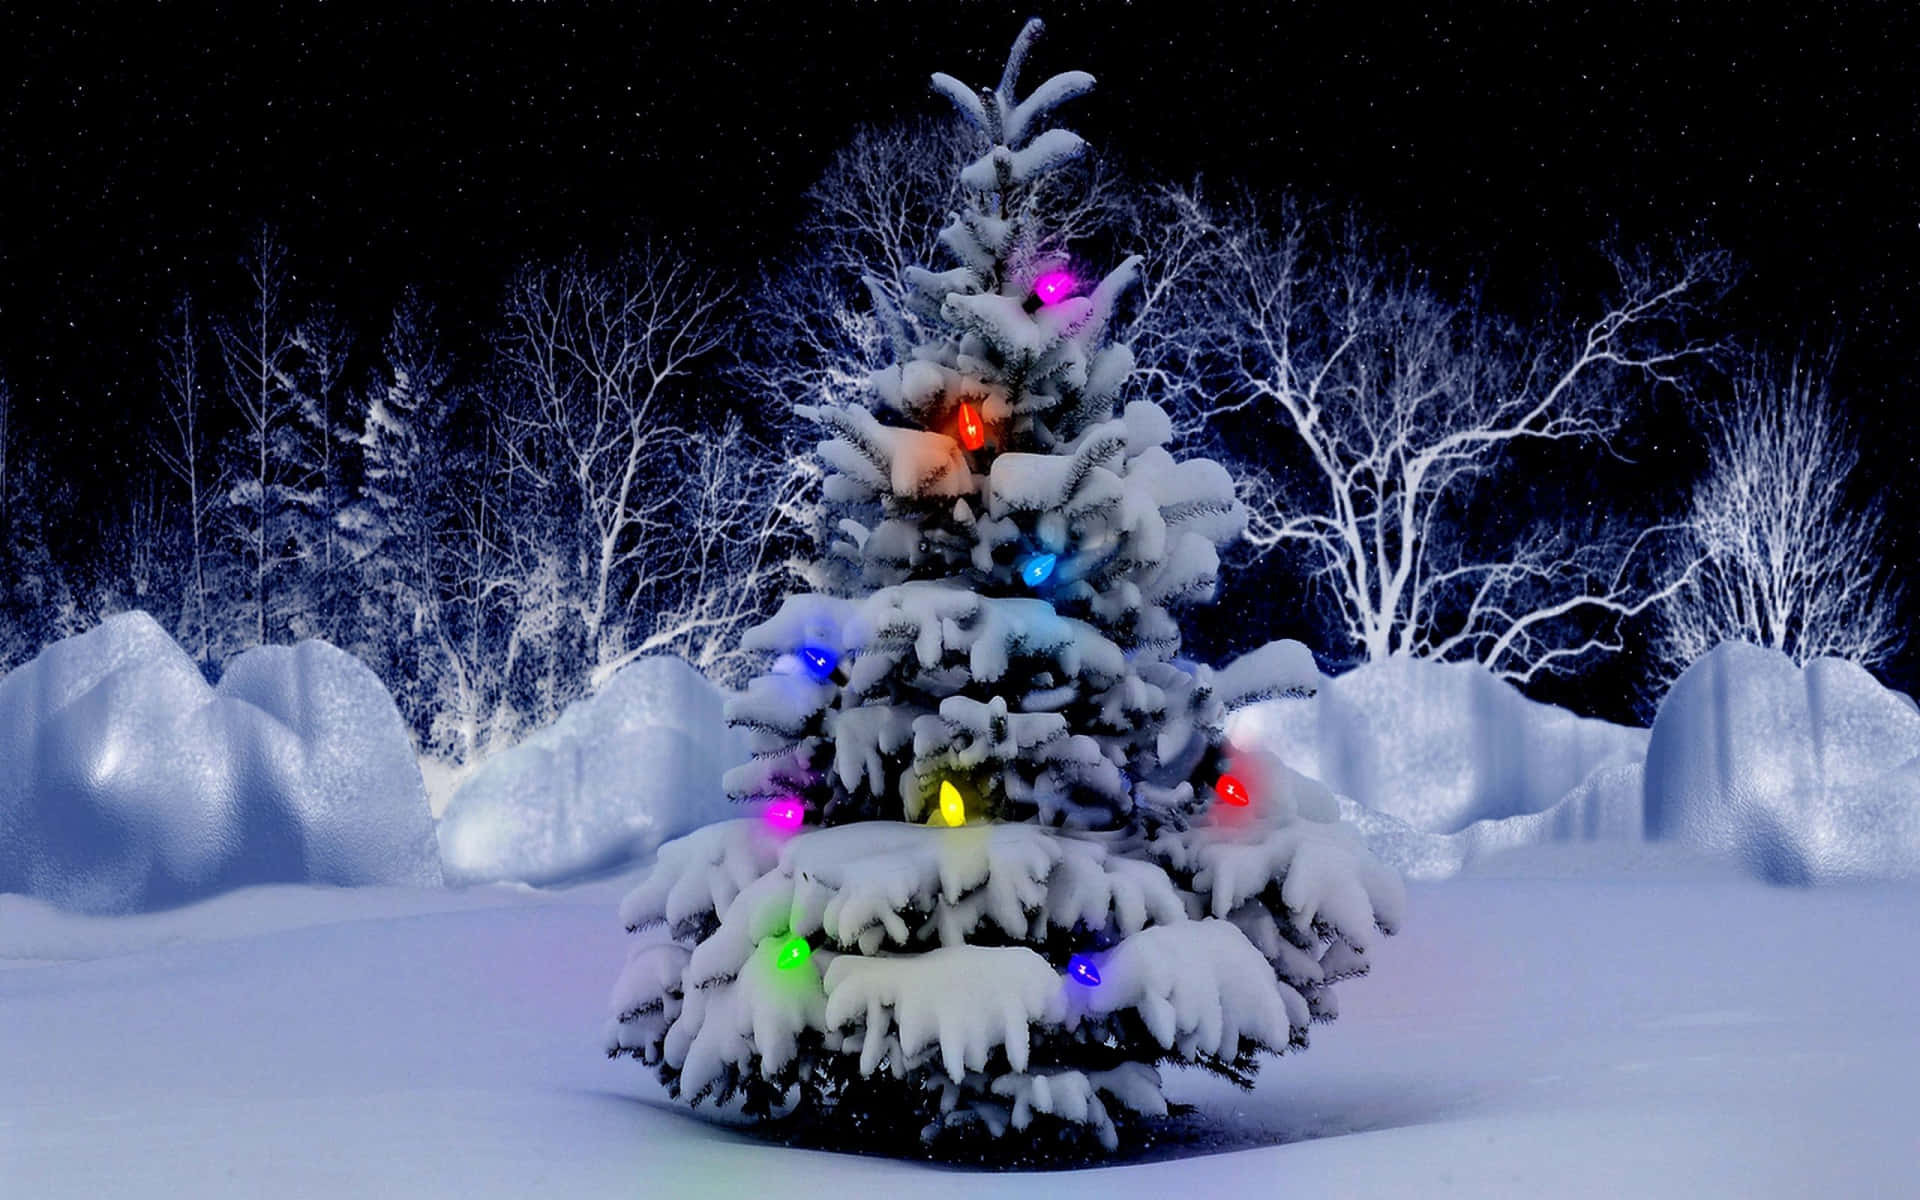 Christmas Tree In The Snow With Colorful Lights